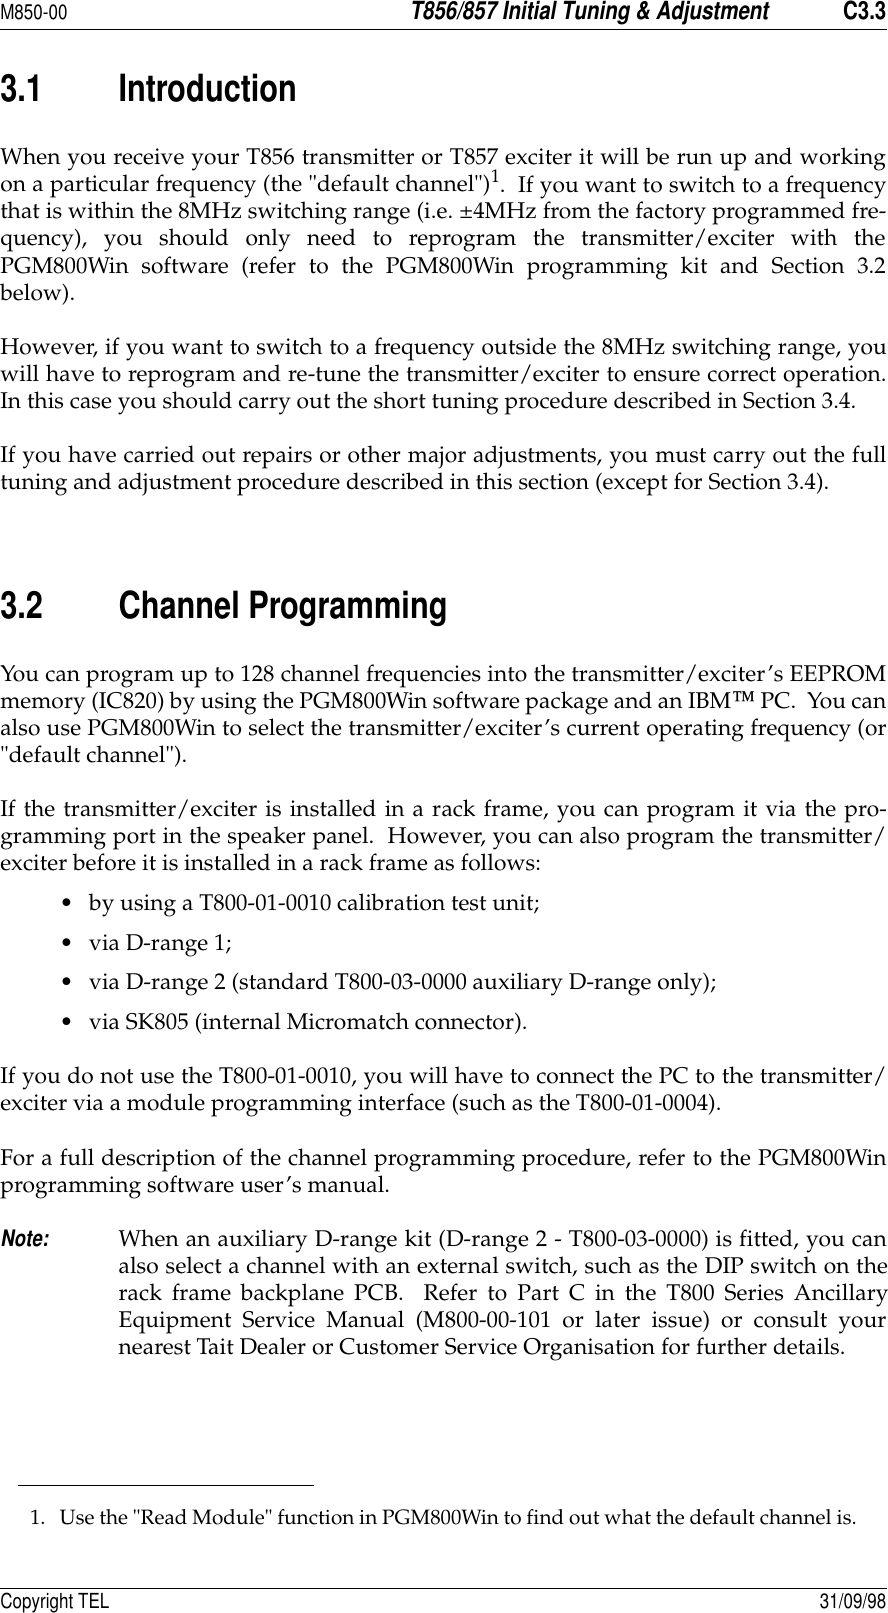 M850-00T856/857 Initial Tuning &amp; AdjustmentC3.3Copyright TEL 31/09/983.1 IntroductionWhen you receive your T856 transmitter or T857 exciter it will be run up and workingon a particular frequency (the &quot;default channel&quot;)1.  If you want to switch to a frequencythat is within the 8MHz switching range (i.e. ±4MHz from the factory programmed fre-quency), you should only need to reprogram the transmitter/exciter with thePGM800Win software (refer to the PGM800Win programming kit and Section 3.2below).  However, if you want to switch to a frequency outside the 8MHz switching range, youwill have to reprogram and re-tune the transmitter/exciter to ensure correct operation.In this case you should carry out the short tuning procedure described in Section 3.4.If you have carried out repairs or other major adjustments, you must carry out the fulltuning and adjustment procedure described in this section (except for Section 3.4).  3.2 Channel ProgrammingYou can program up to 128 channel frequencies into the transmitter/exciter’s EEPROMmemory (IC820) by using the PGM800Win software package and an IBM PC.  You canalso use PGM800Win to select the transmitter/exciter’s current operating frequency (or&quot;default channel&quot;).If the transmitter/exciter is installed in a rack frame, you can program it via the pro-gramming port in the speaker panel.  However, you can also program the transmitter/exciter before it is installed in a rack frame as follows:• by using a T800-01-0010 calibration test unit;• via D-range 1;• via D-range 2 (standard T800-03-0000 auxiliary D-range only);• via SK805 (internal Micromatch connector).If you do not use the T800-01-0010, you will have to connect the PC to the transmitter/exciter via a module programming interface (such as the T800-01-0004).For a full description of the channel programming procedure, refer to the PGM800Winprogramming software user’s manual.Note:When an auxiliary D-range kit (D-range 2 - T800-03-0000) is fitted, you canalso select a channel with an external switch, such as the DIP switch on therack frame backplane PCB.  Refer to Part C in the T800 Series AncillaryEquipment Service Manual (M800-00-101 or later issue) or consult yournearest Tait Dealer or Customer Service Organisation for further details.1. Use the &quot;Read Module&quot; function in PGM800Win to find out what the default channel is.